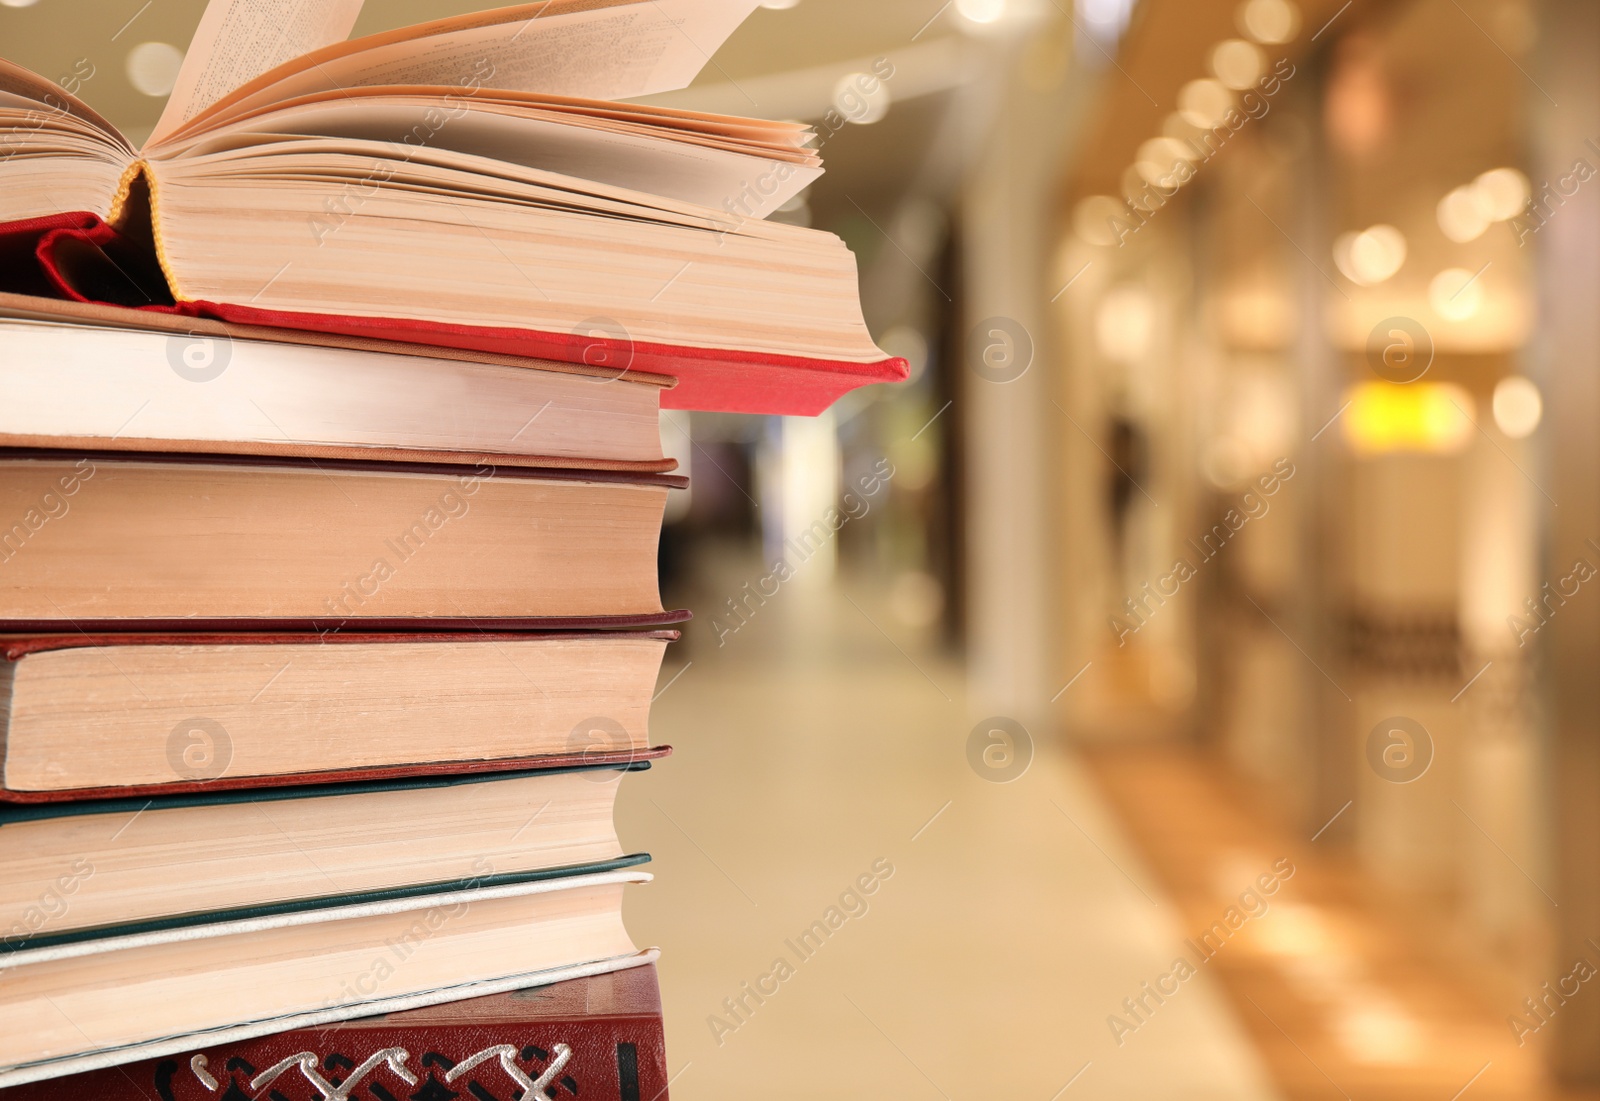 Image of Collection of different books against blurred background, space for text